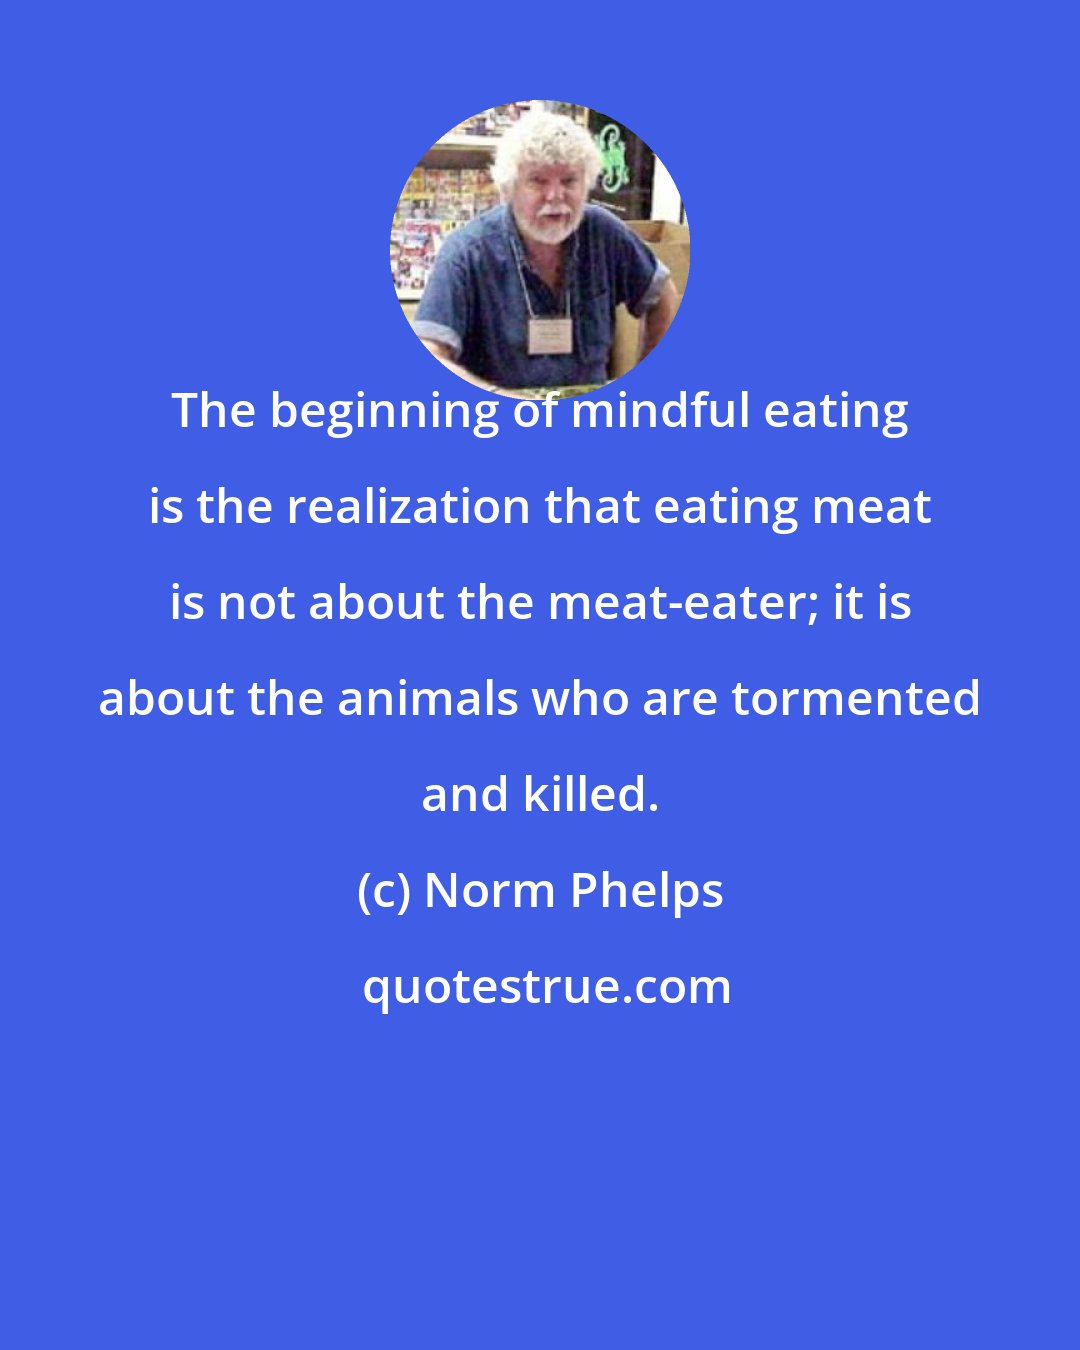 Norm Phelps: The beginning of mindful eating is the realization that eating meat is not about the meat-eater; it is about the animals who are tormented and killed.